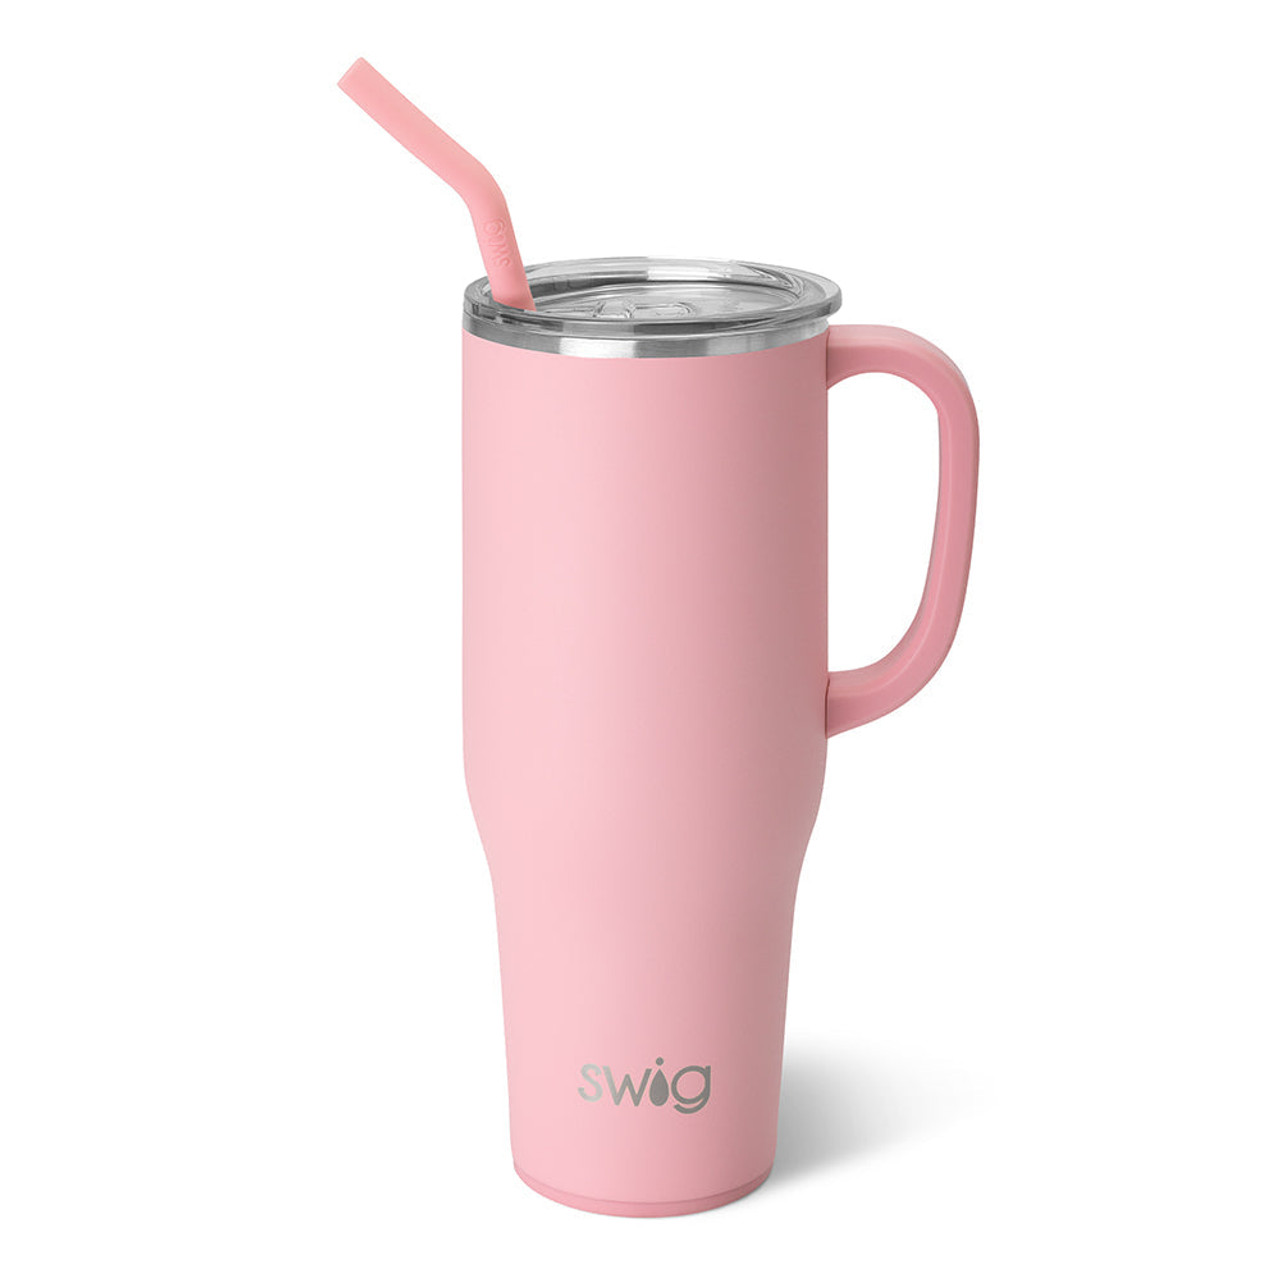 https://cdn11.bigcommerce.com/s-yhl8wqmxu2/images/stencil/1280x1280/products/83888/48198/swig-life-signature-40oz-insulated-stainless-steel-mega-mug-with-handle-blush-main__37904.1679932425.jpg?c=2